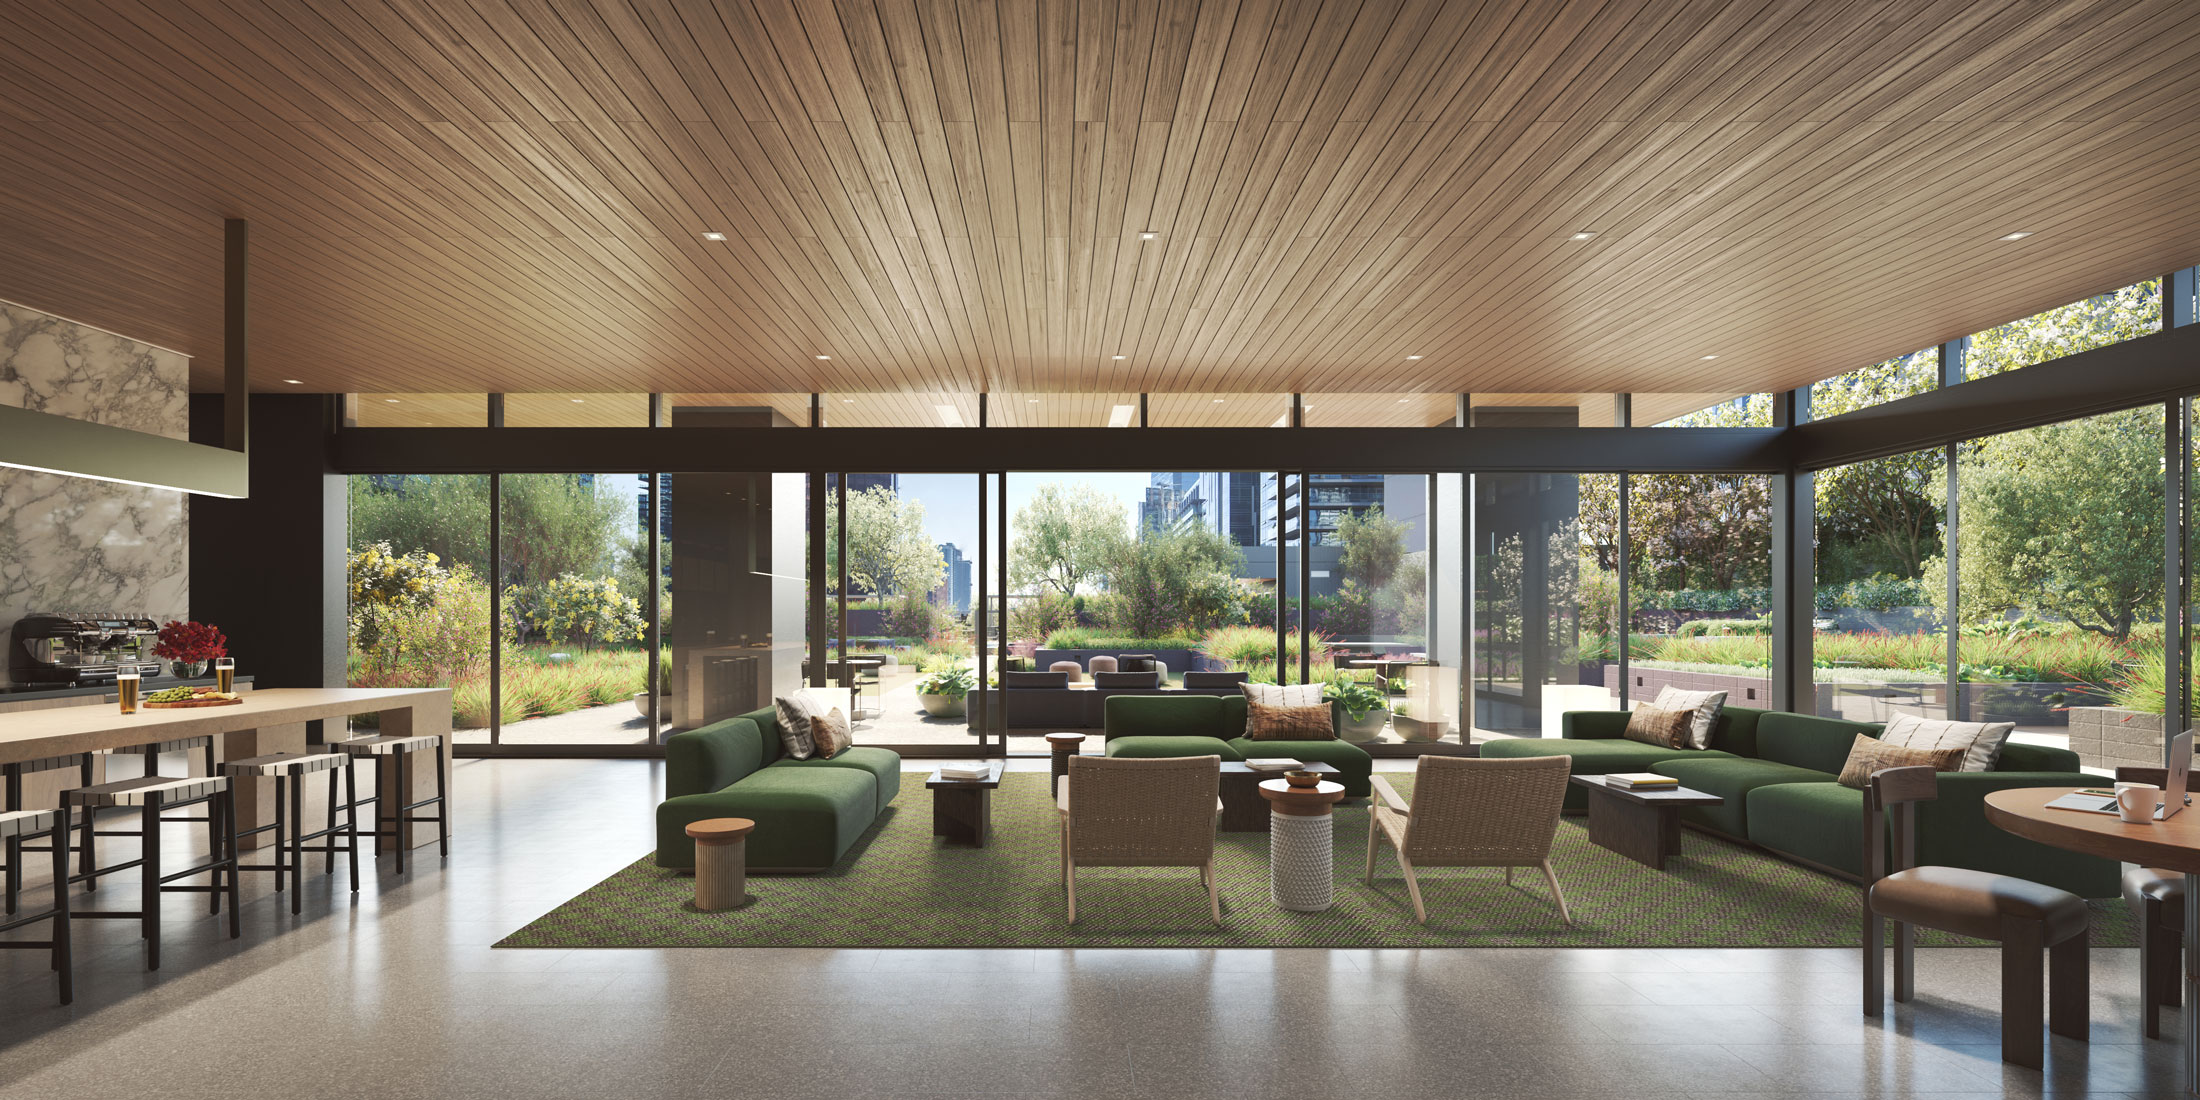 Architectural Rendering of the community room of the 755 South Figueroa Street project located in Los Angeles, California